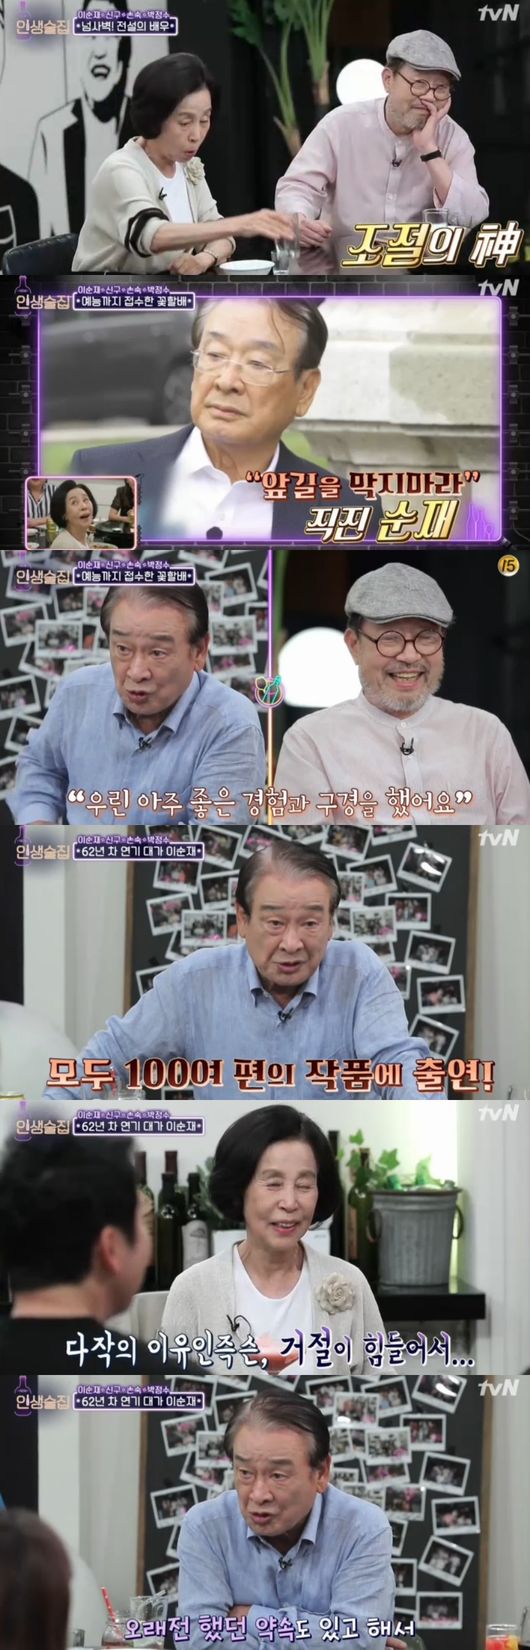 Actor Son Sook praised the IUs Acting, which was breathed together in the drama The Man from Nowhere.Lee Soon-jae, Shin Gu, Son Sook, and Park Jung-soo appeared as the special feature of Actor of the Numsa Wall legend in TVN entertainment Life Bar broadcast on the 13th.Shin Gu, a drunken enthusiast, Lee Soon-jae, and Son Sook and Park Jung-soo appeared together as a life bar.At this time, he summoned the flower-grass Memory of Shin Gu and Lee Soon-jae, saying that Lee Soon-jae had proposed to Shin Gu; the schedule was just right and left.It was a topic of conversation because it was a trip of new concept people who made the world buzz. The two people said, It was a big study because I was curious about the difficult trip, I wanted to see this opportunity.Park Jung-soo mentioned his son Kim Kyung-ho, Life On Mars, a drama with his son as an Acting senior; and appeared in a cameo in the final episode at the request of his son.Park Jung-soo said, It was a good memory with my son. I do not give any advice on Acting, I only praise it when I do well.The most memorable piece was LA Arirang. Every two months, he said that he actually shot all the outdoor shooting in LA, and told the behind-the-scenes story.In addition, because of the actual American drama motif, I was able to act in front of the audience, so I heard a real laugh with 100 pros. Park Jung-soo recalled that it was a work that enjoyed breathing with the audience.I got pictures of my beauty. I was popular during my school days, so I received a lot of love notes from boys.Lee Soon-jae, who was named Whats Love? was the first Korean hit in the drama to fart.He was surprised that he was not able to appear on the show when he was divorced, as well as not being divorced in the drama.Lee Soon-jae, who earned the nickname of Yadong Soon-jae, also said, I did not do it at first, I have face.However, unlike the concern, he received a lot of love and showed an old actor who fits the flow of the times.Shin Gu said, I can not stop them in the Waman Sea and the drama Do it your way which showed the love of fatherhood.Shin Gu recalled that he was an aspiring announcer and thought about the announcer in the midst of his career after entering the army.But he said that his career was not easy because of the job he had not been treated at the time.Shin Gu was proud to be a blessing to work so far than money and honor. Shin Gu said, I only know how to do it.Son Sook cited the work The Man from Nowhere: he learned all the sign language himself.IU also showed perfect sign language, Son Sook said. I am really good at Acting, a special friend with concentration commitment, a completely old man.In addition, he said, I would like to try it. He said that playing will deepen his acting, and he showed affection for recommending good works.Son Sook continued to show special affection, saying, IU is pretty and I will die.Life Bar broadcast screen capture